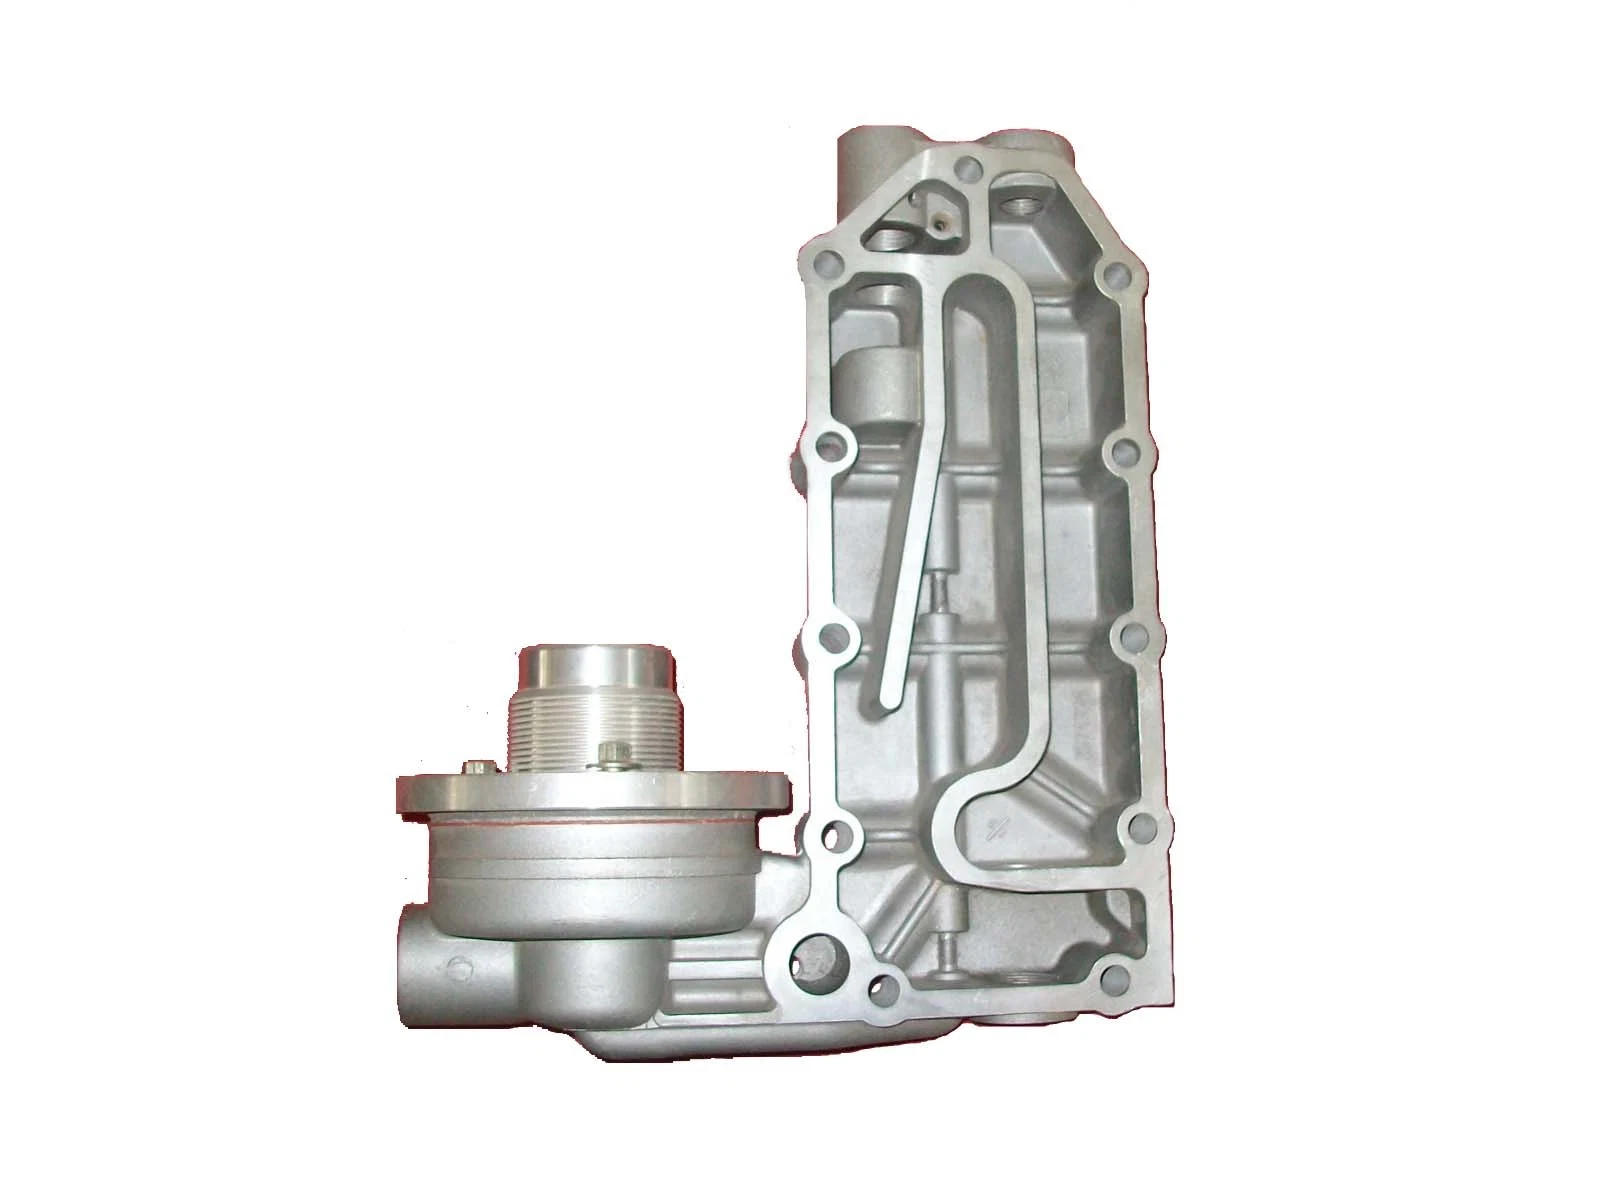 Zhejiang Factory's High-Quality Low-Pressure Customized High-Pressure Die-Casting Aluminum Gravity Die-Casting